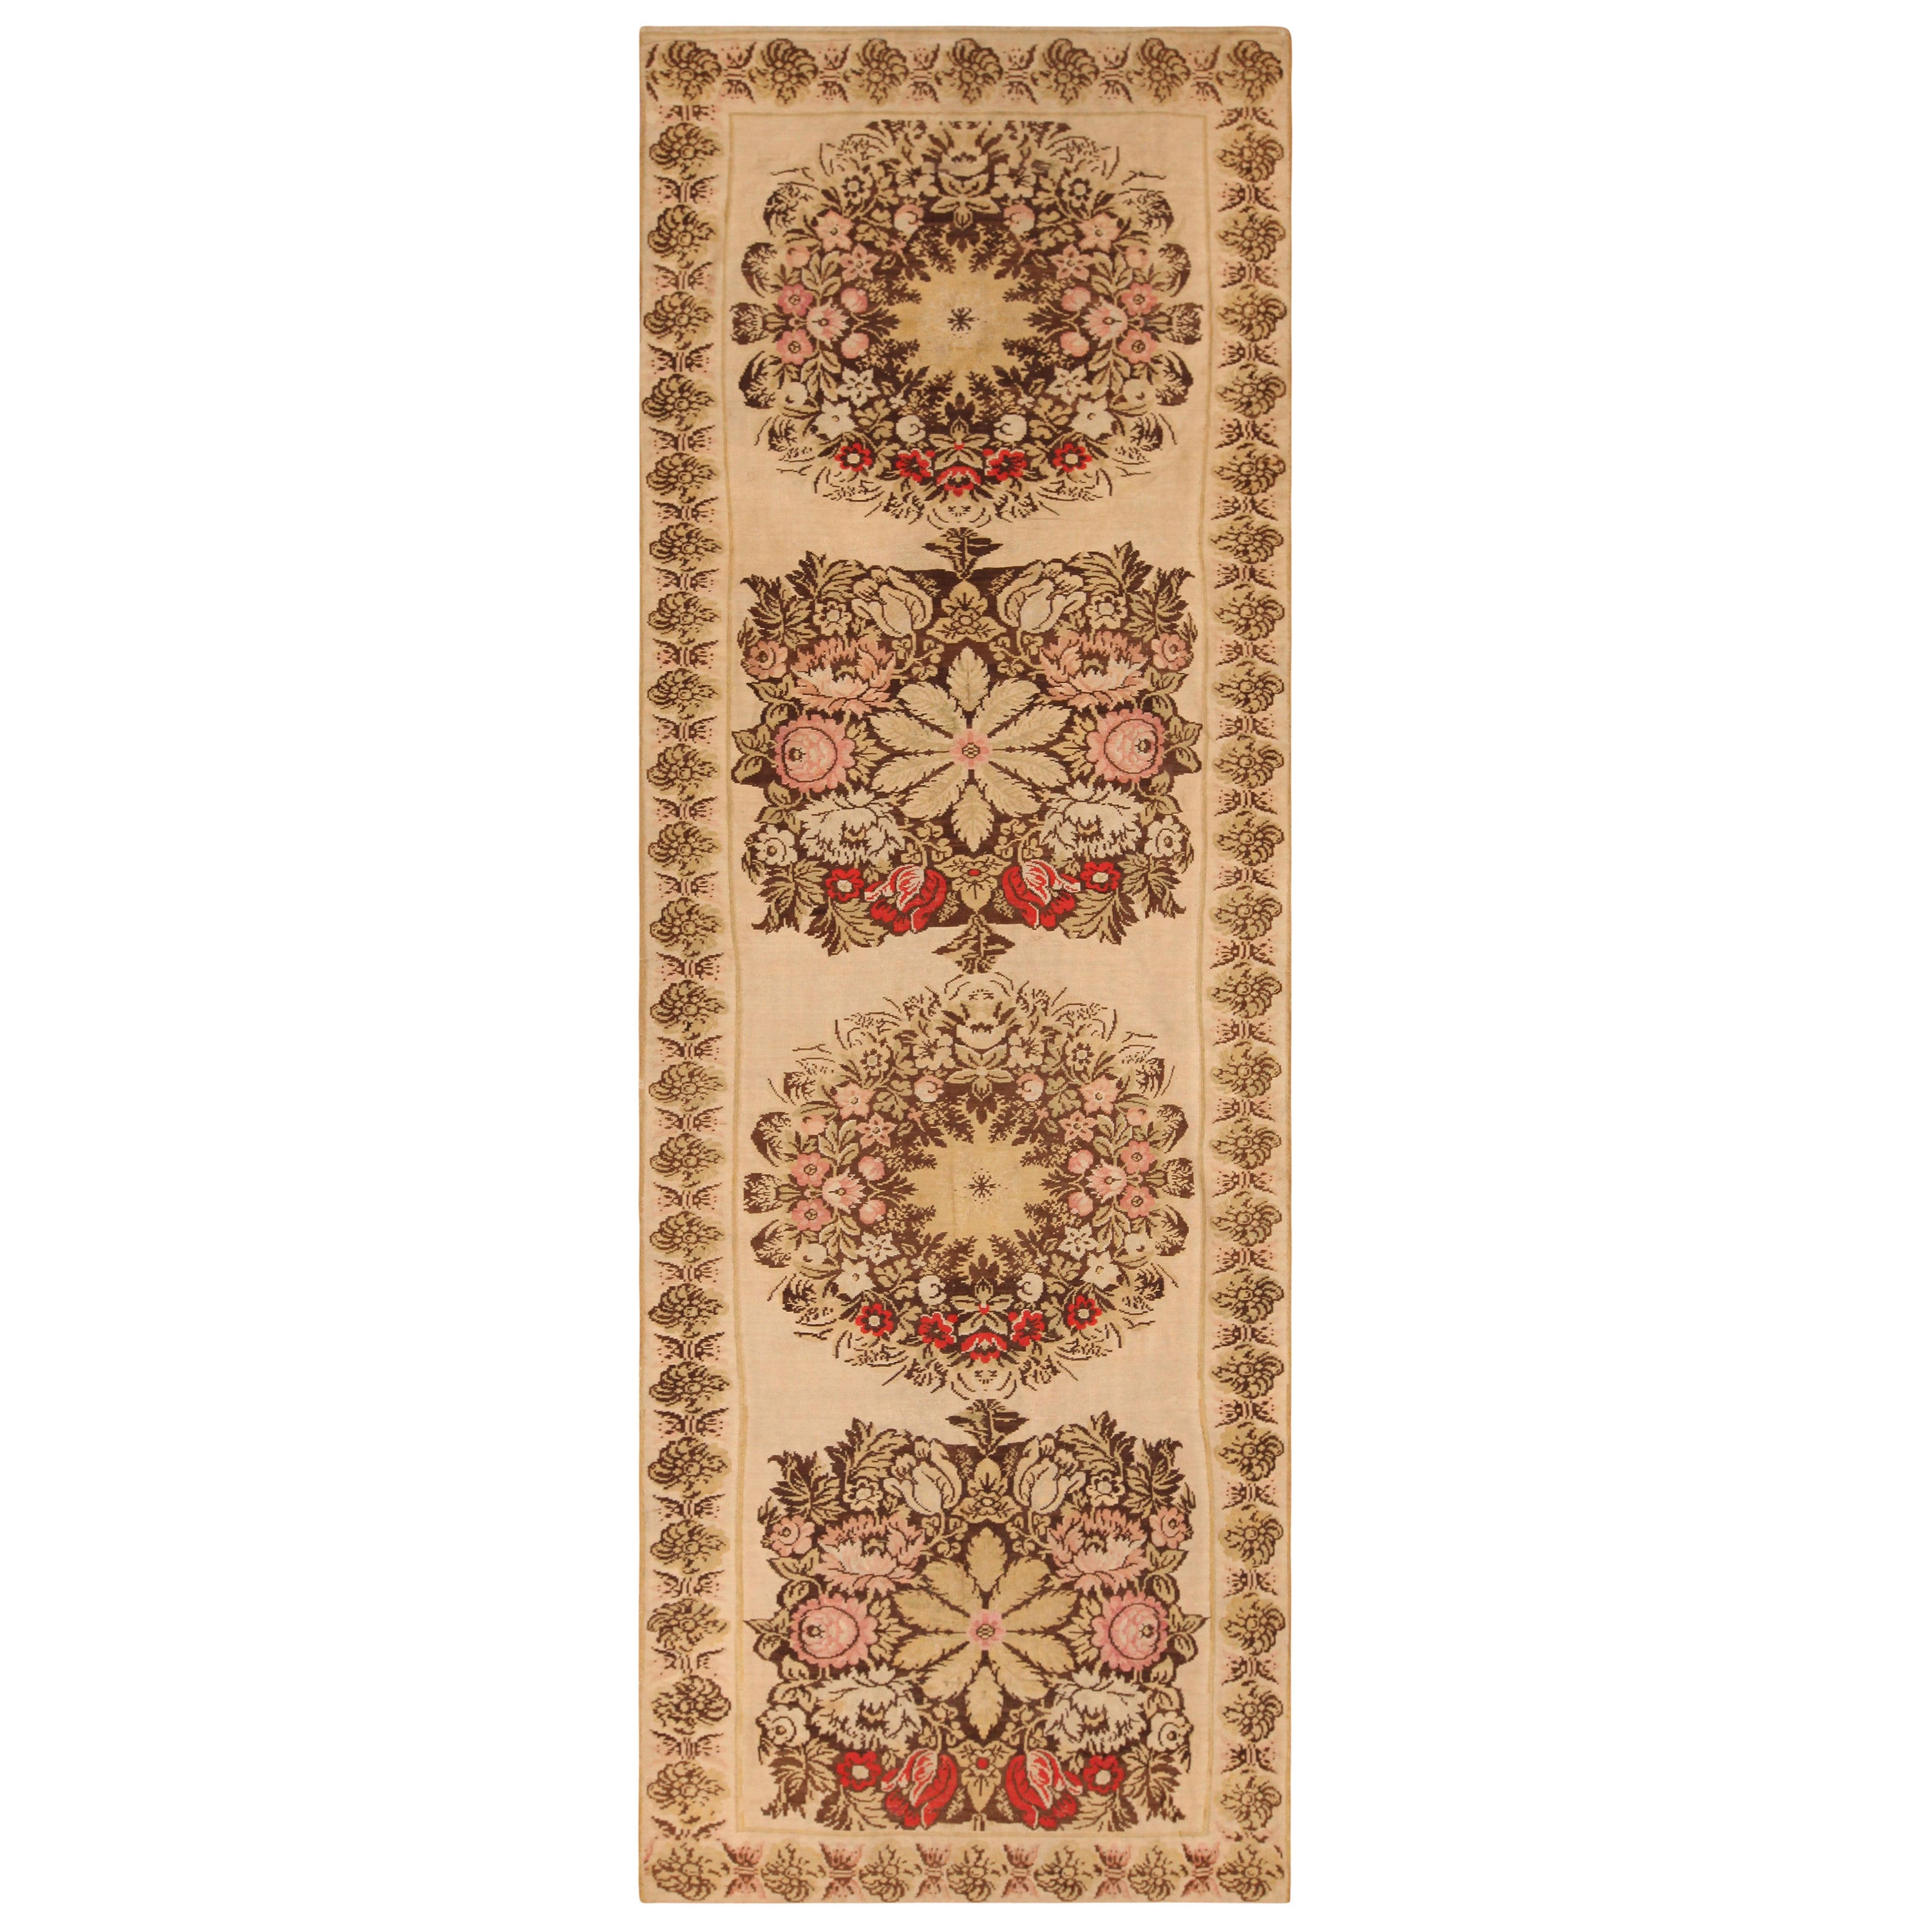 Nazmiyal Collection Antique Bessarabian Kilim Runner Rug.Size: 4 ft 3 in x 13 ft